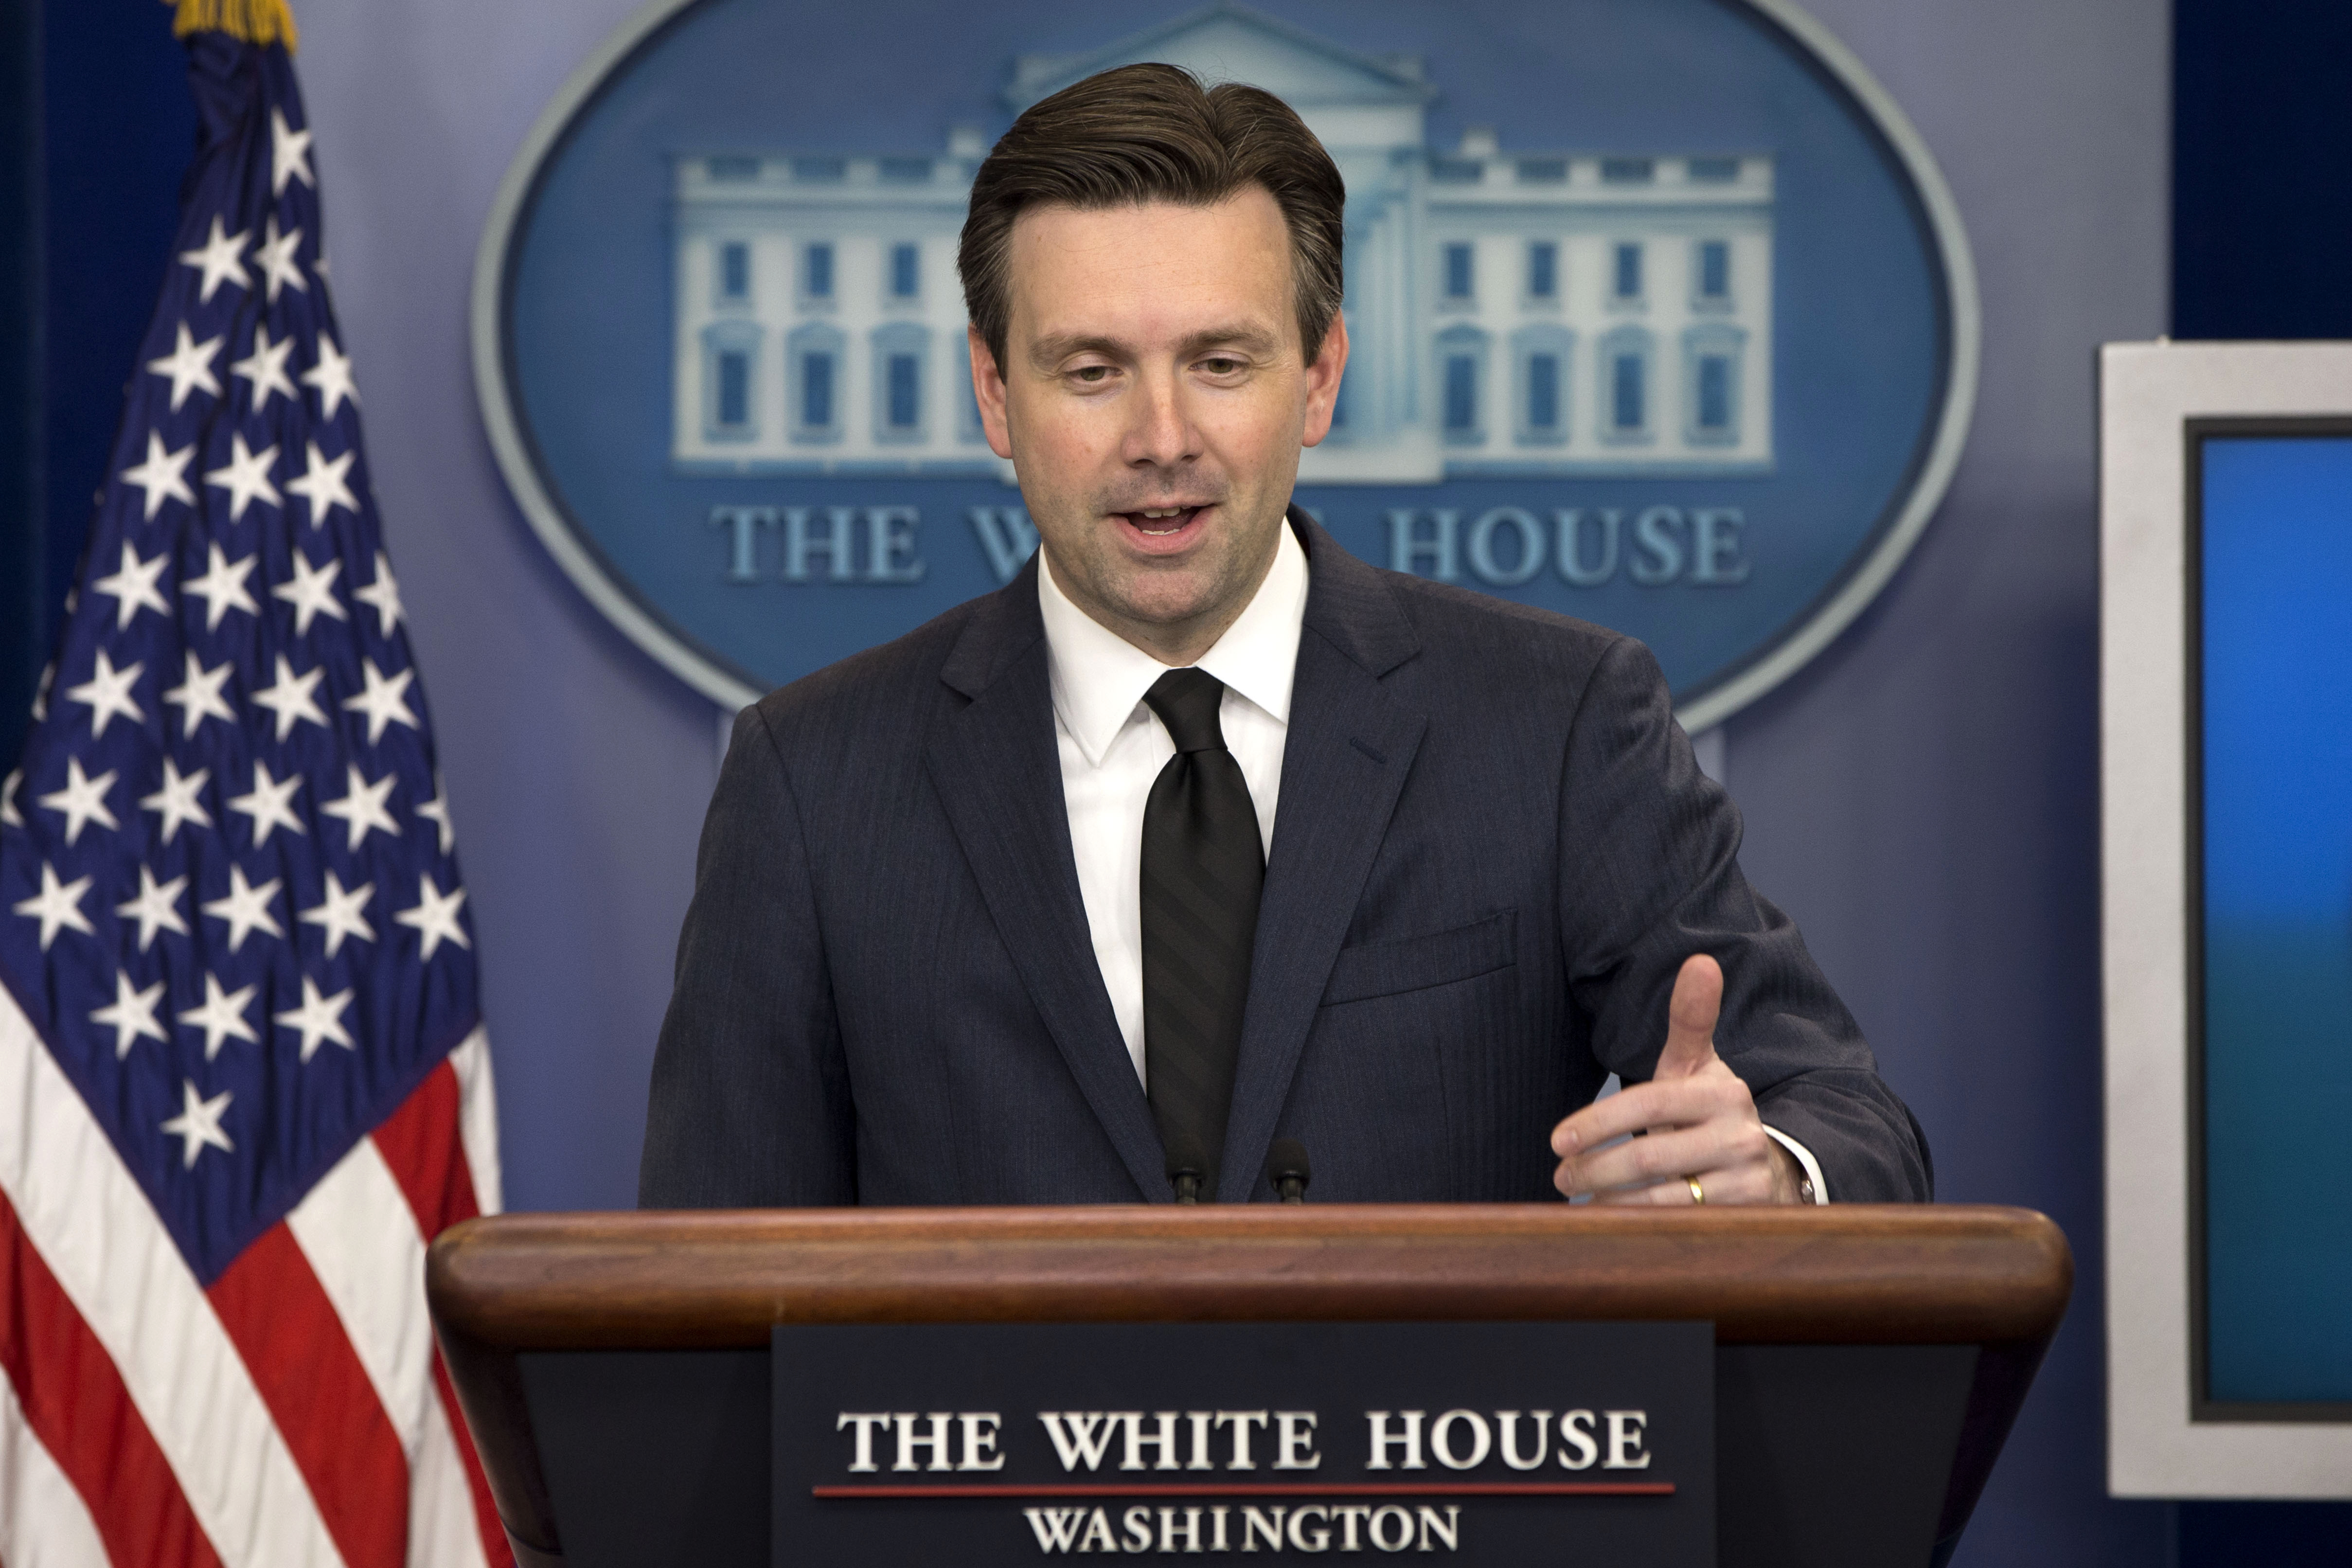 White House press secretary Josh Earnest speaks Tuesday during his daily news briefing at the White House in Washington. | AP